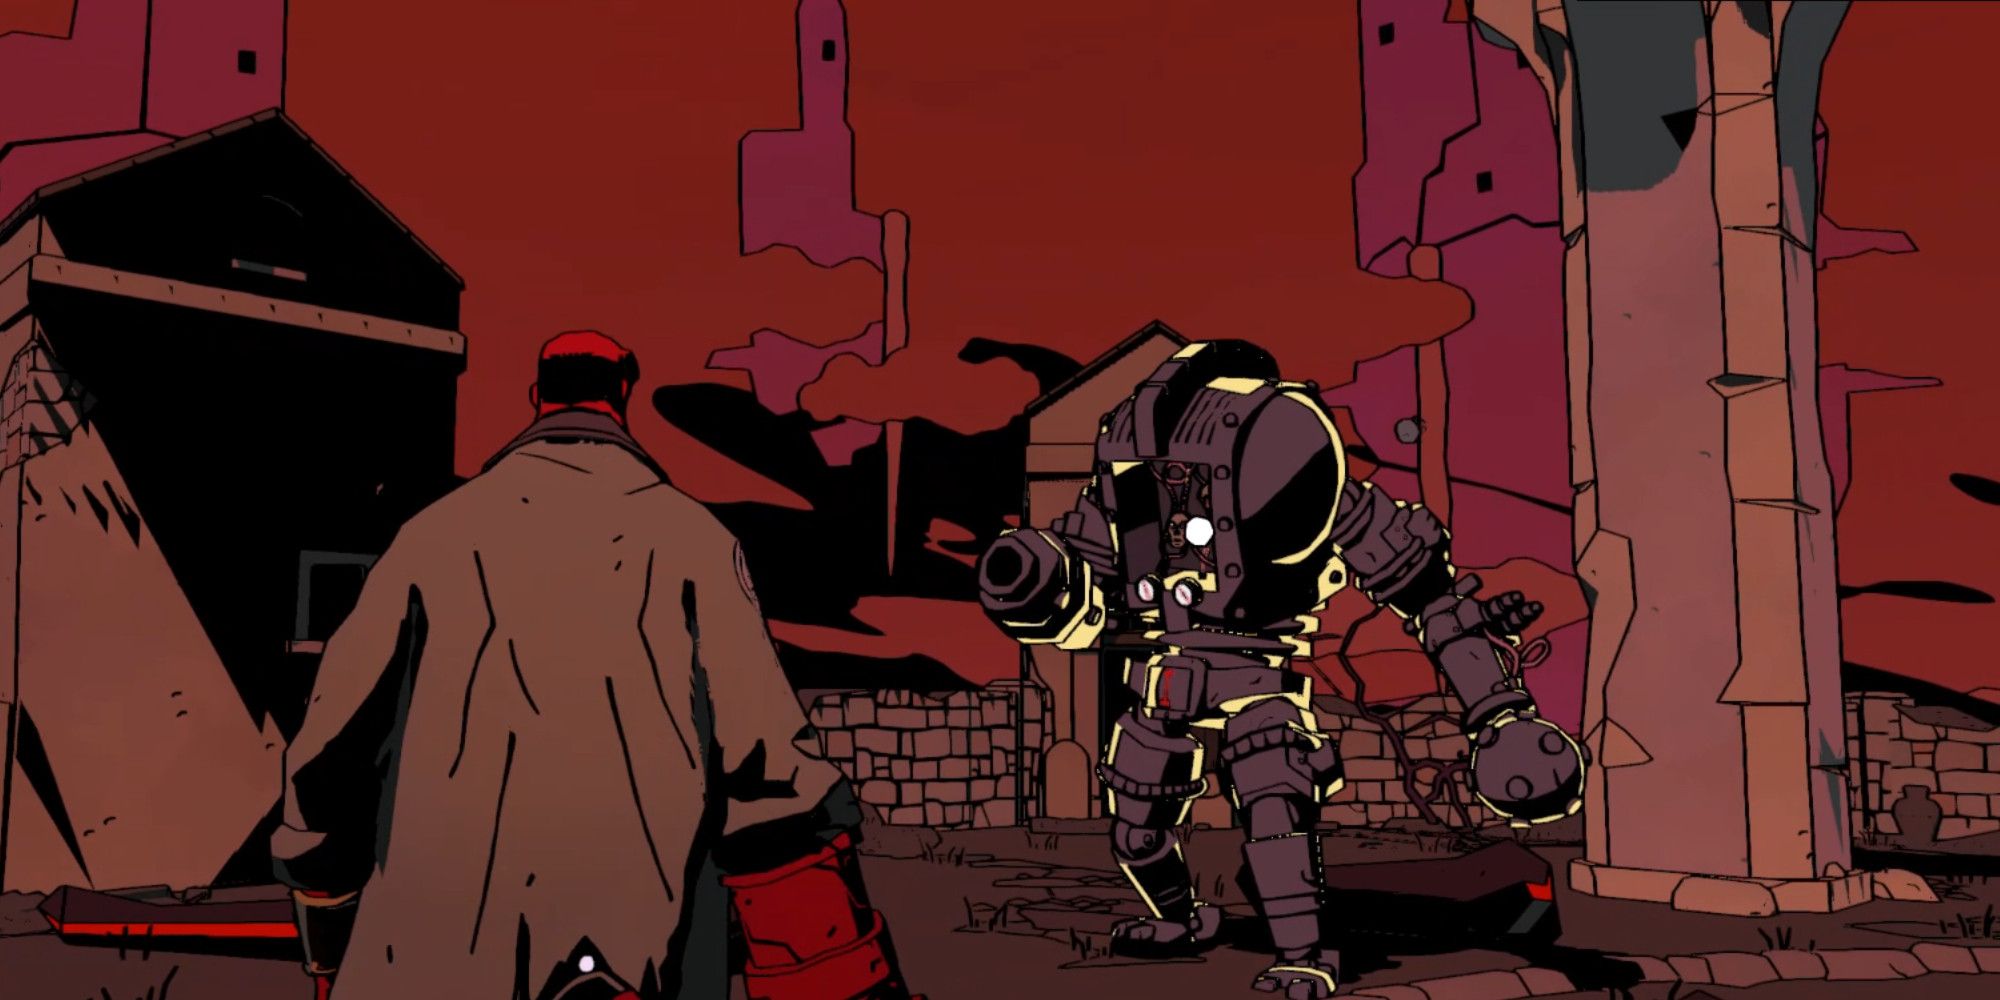 hellboy fights robotron with cannon